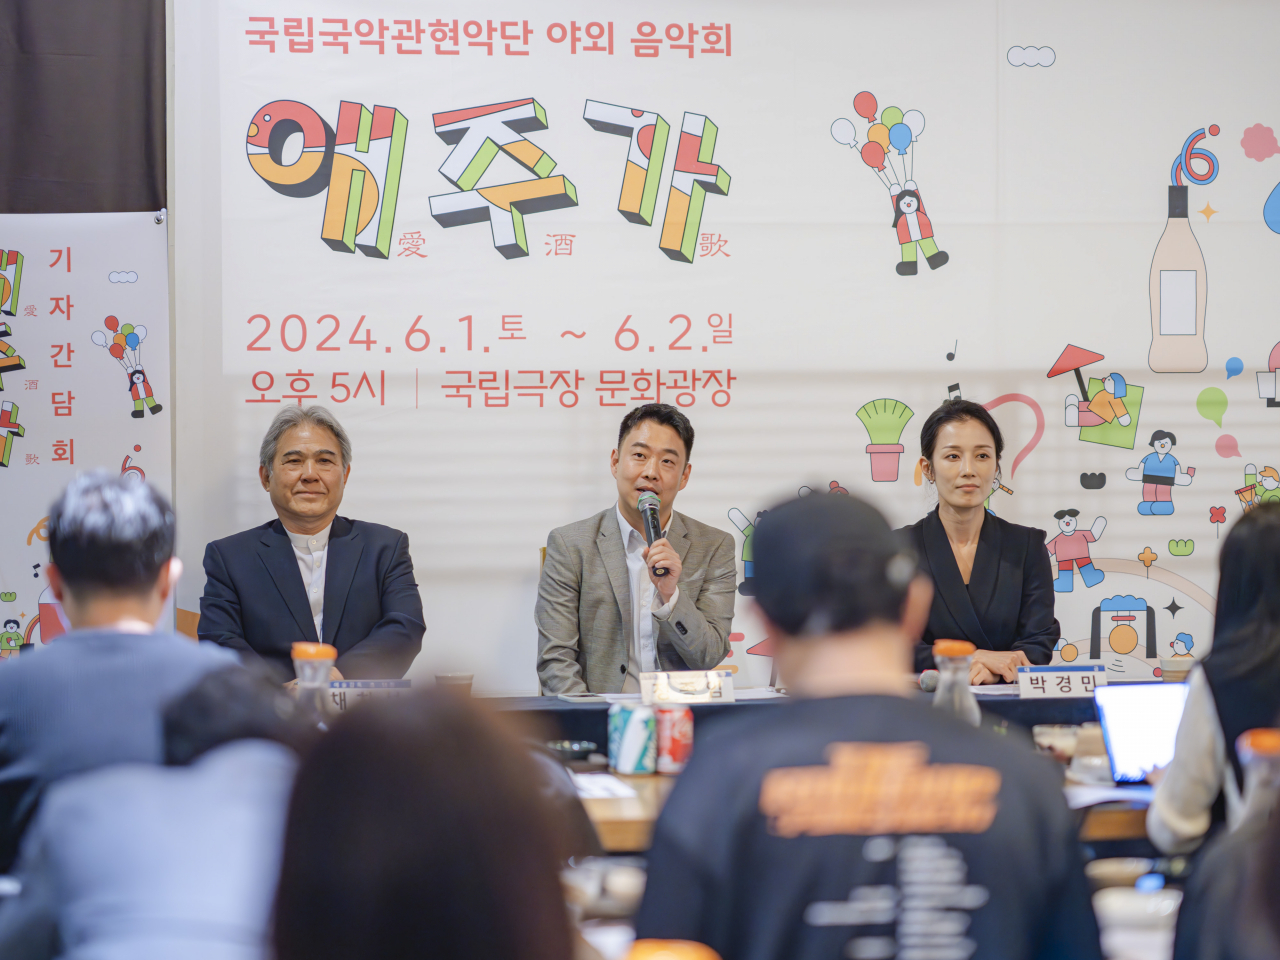 (From left) The National Orchestra of Korea's Artistic director Chae Chi-seong, director of 